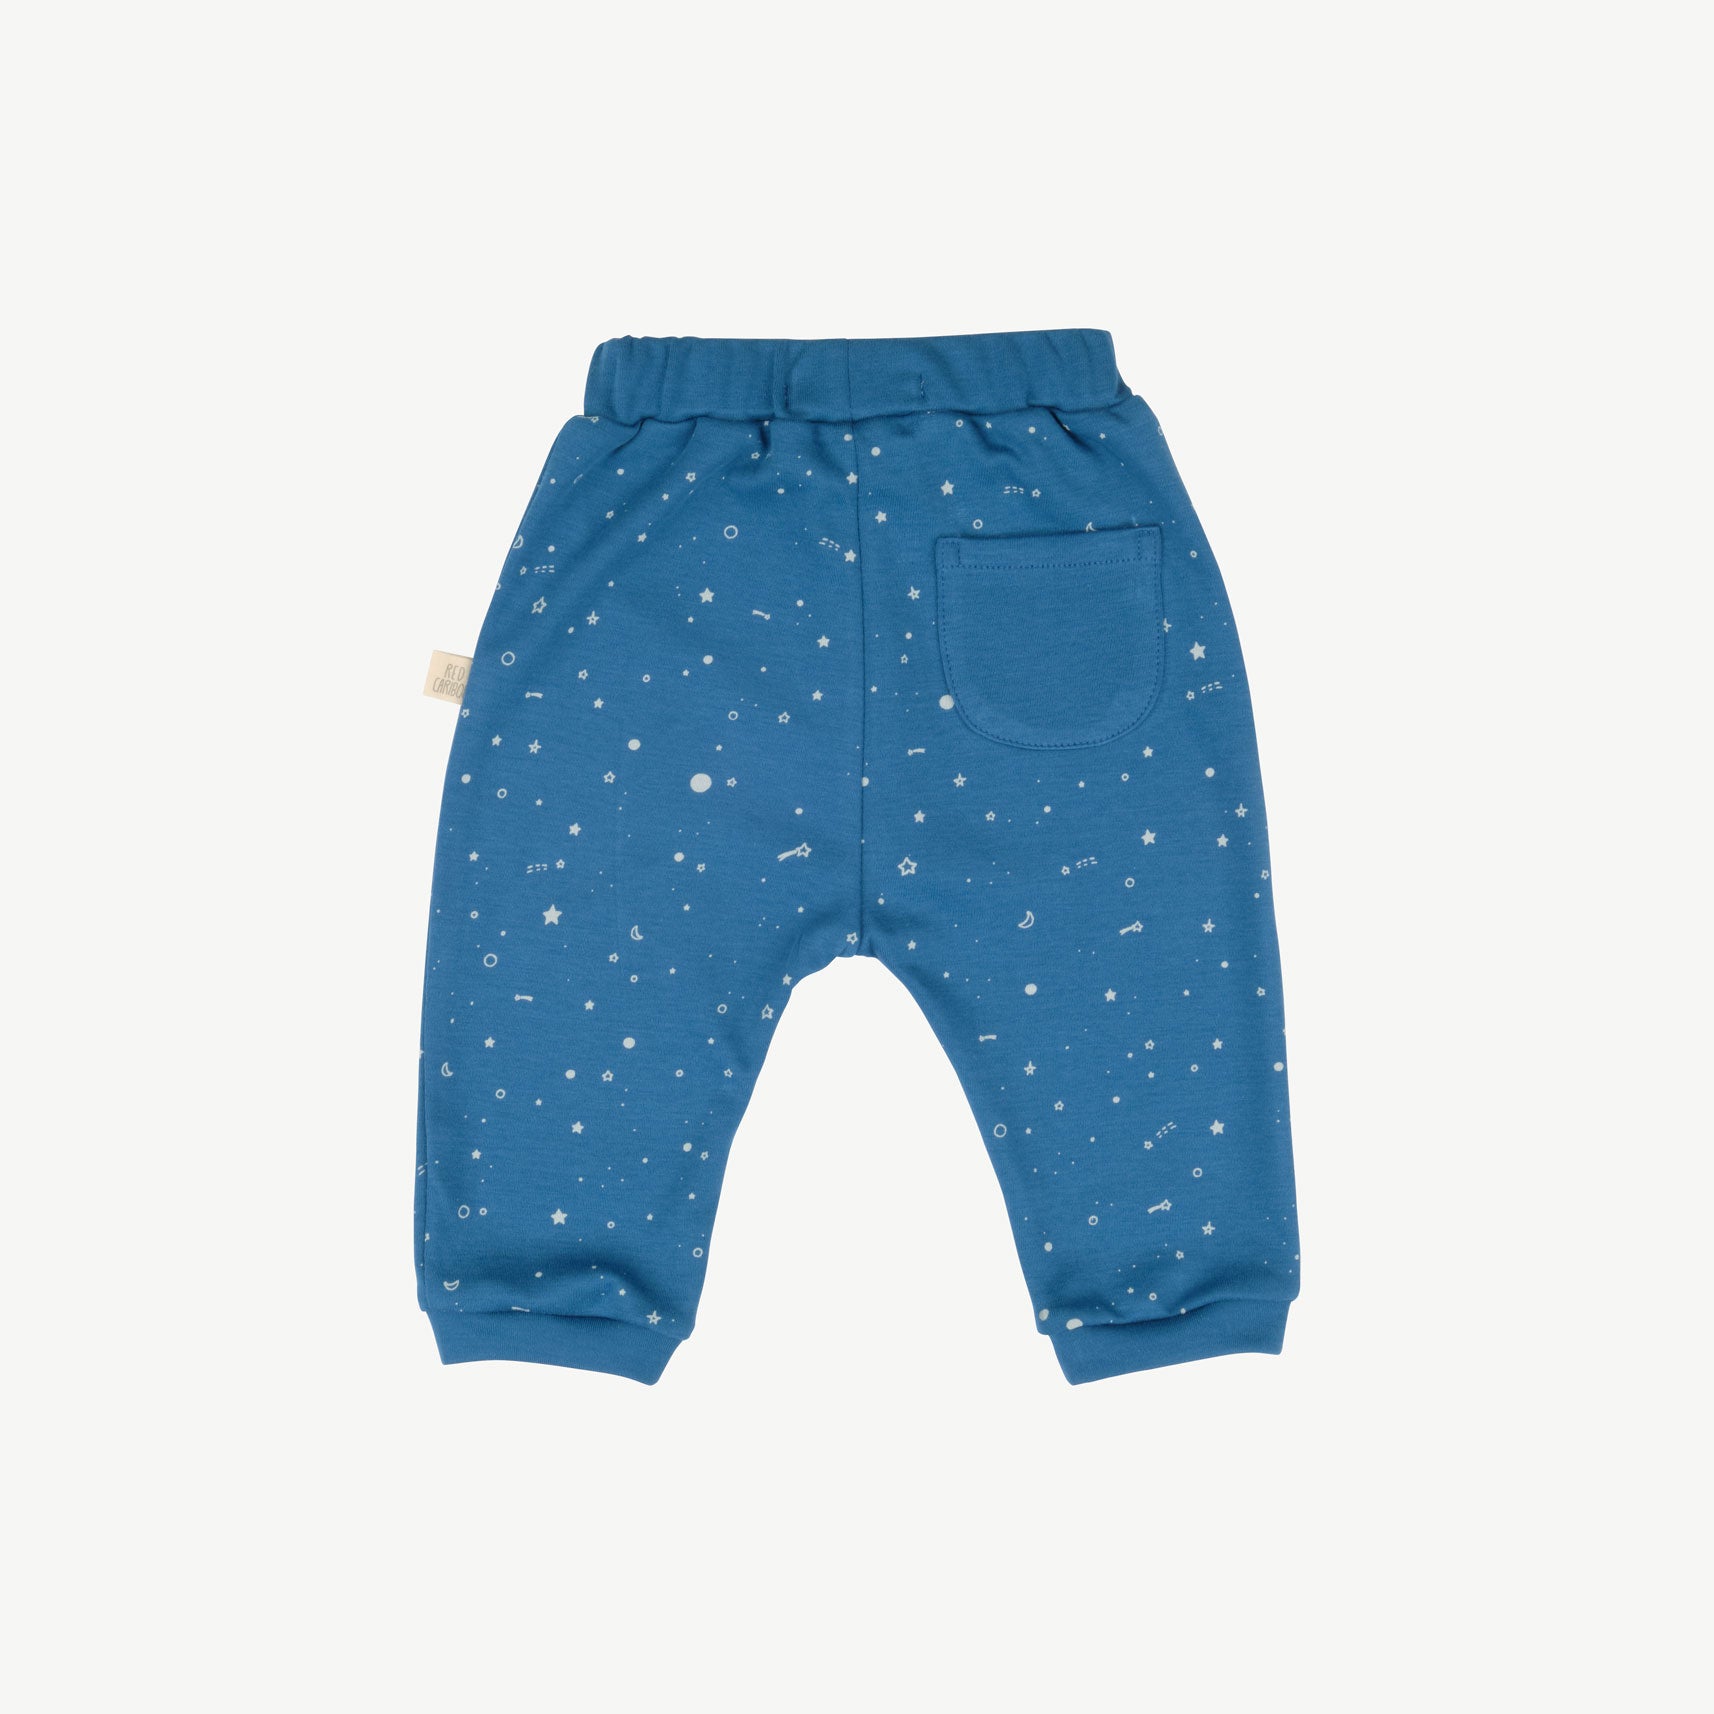 'close to the stars' dark blue baggy pants